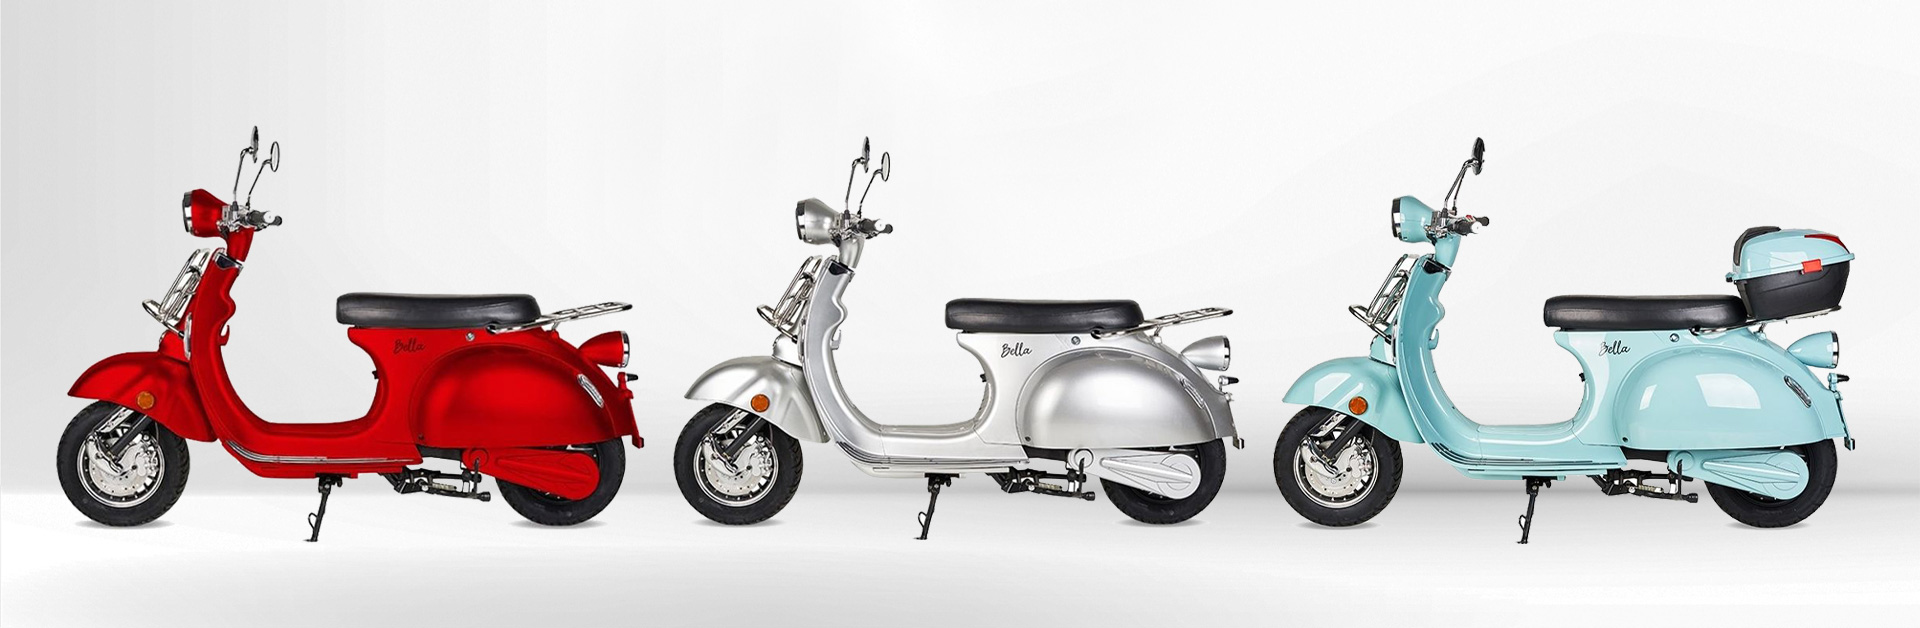 Scooter eléctrico 3000W matriculable Bella